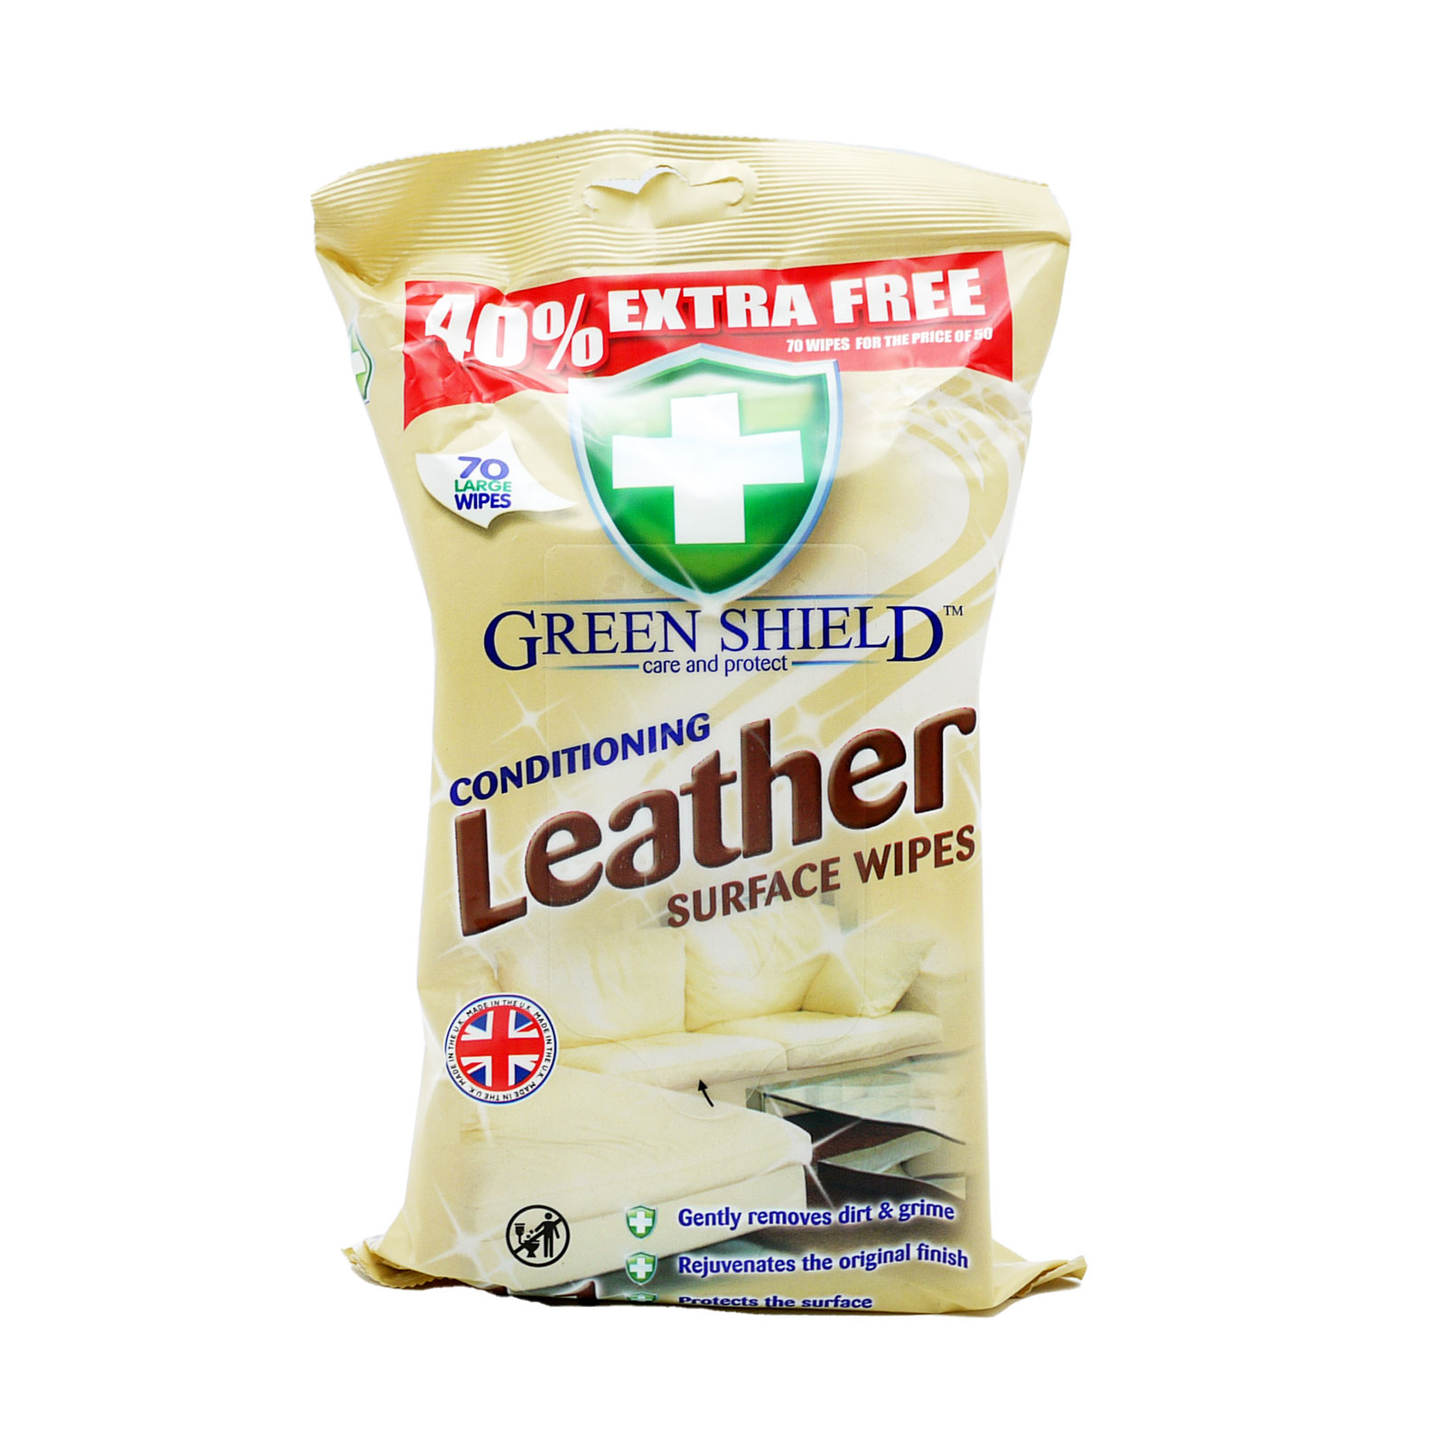 Green Shield Conditioning Leather Surface 70 Wipes 12 Packs